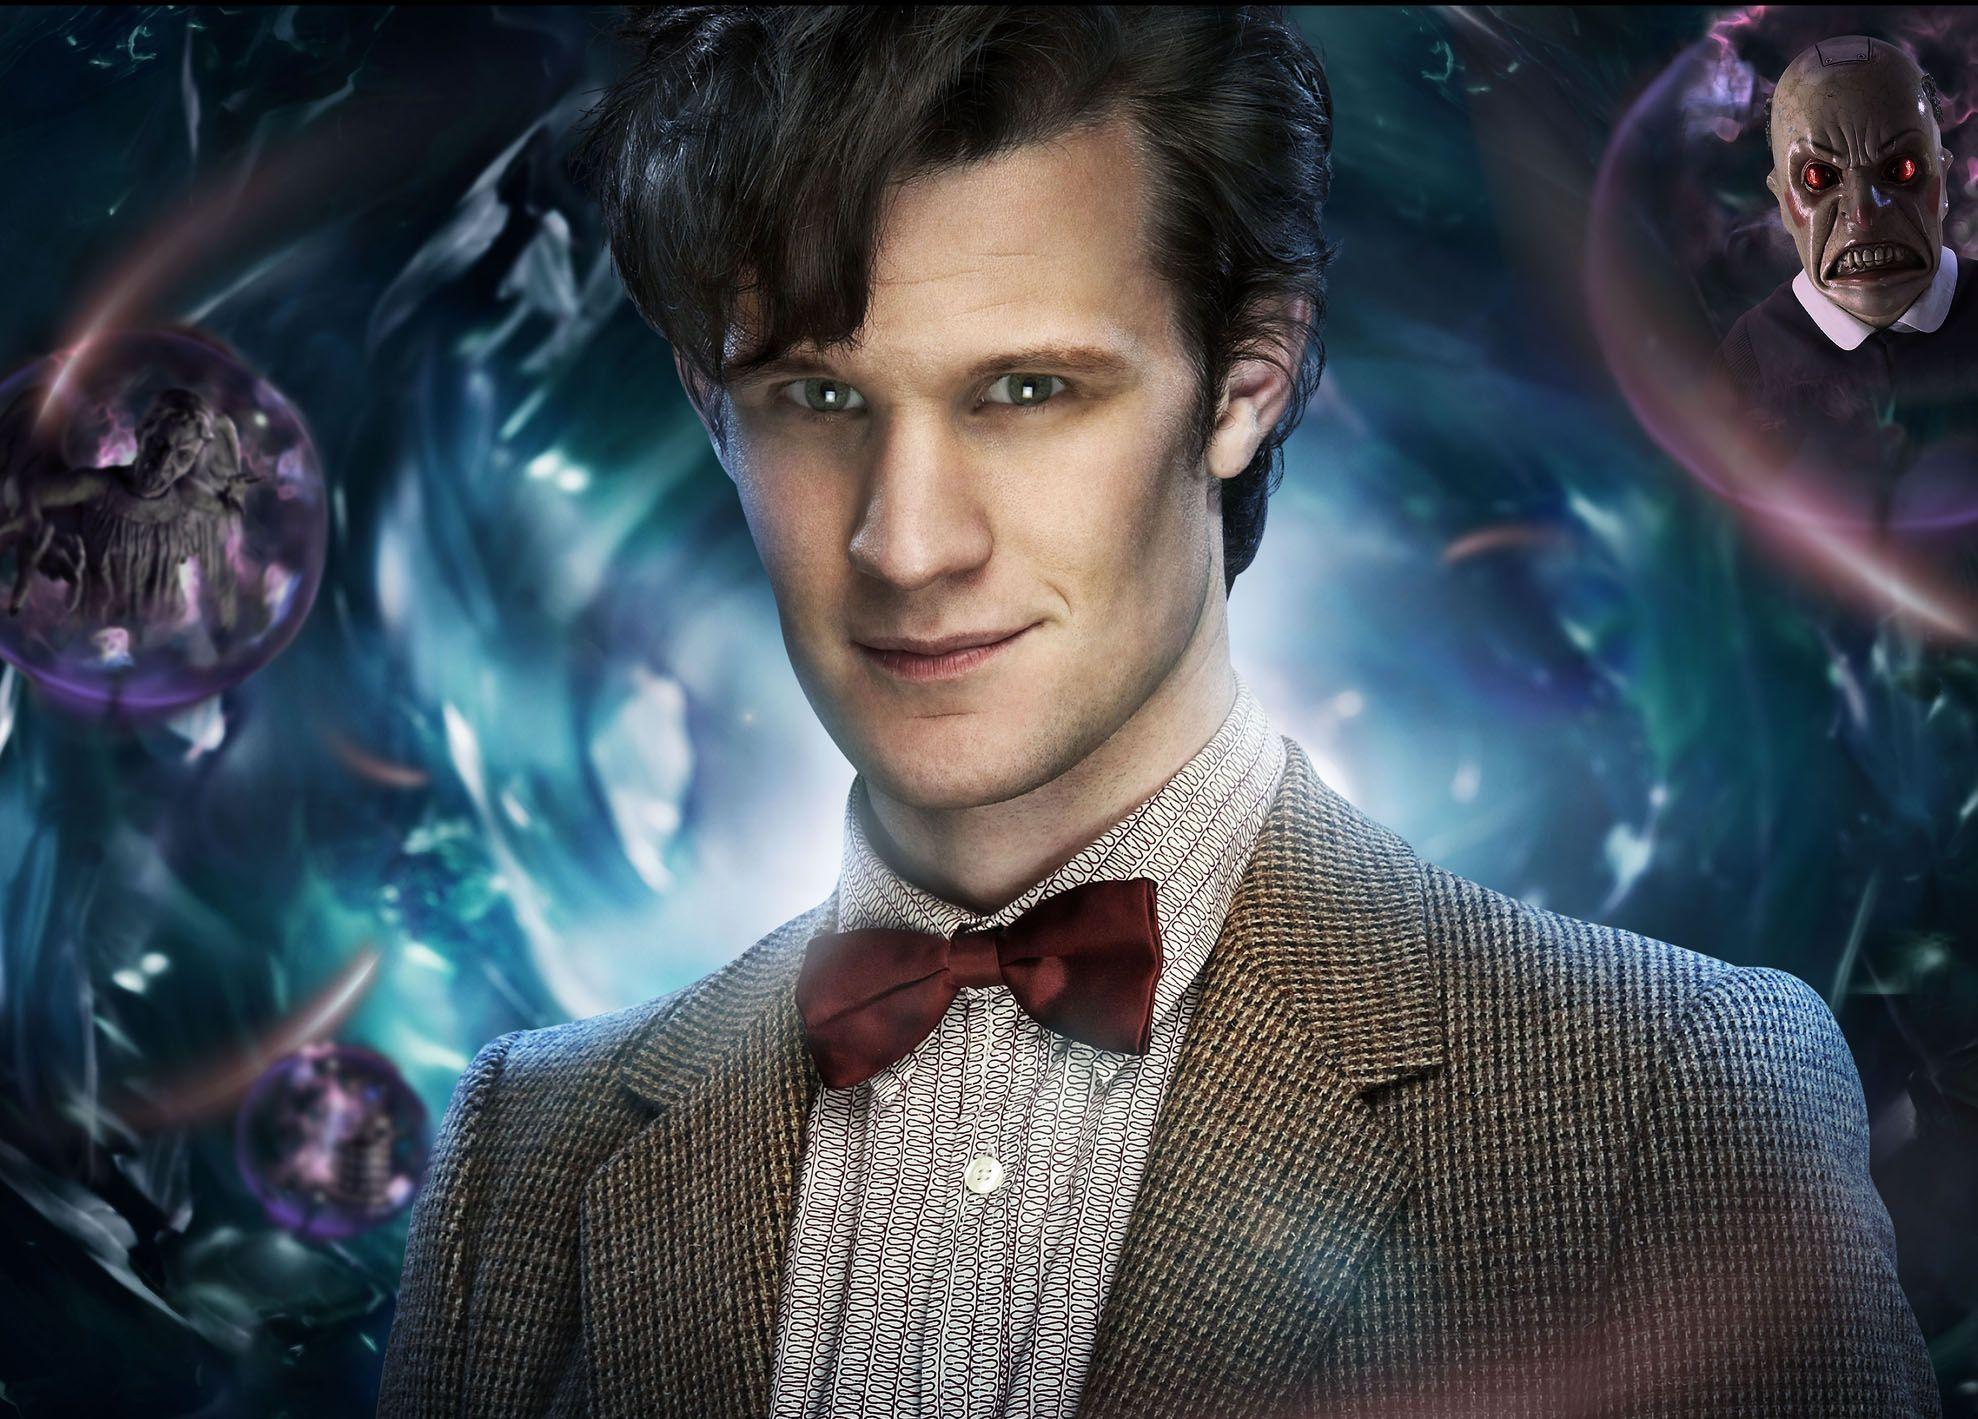 doctor who 11th doctor